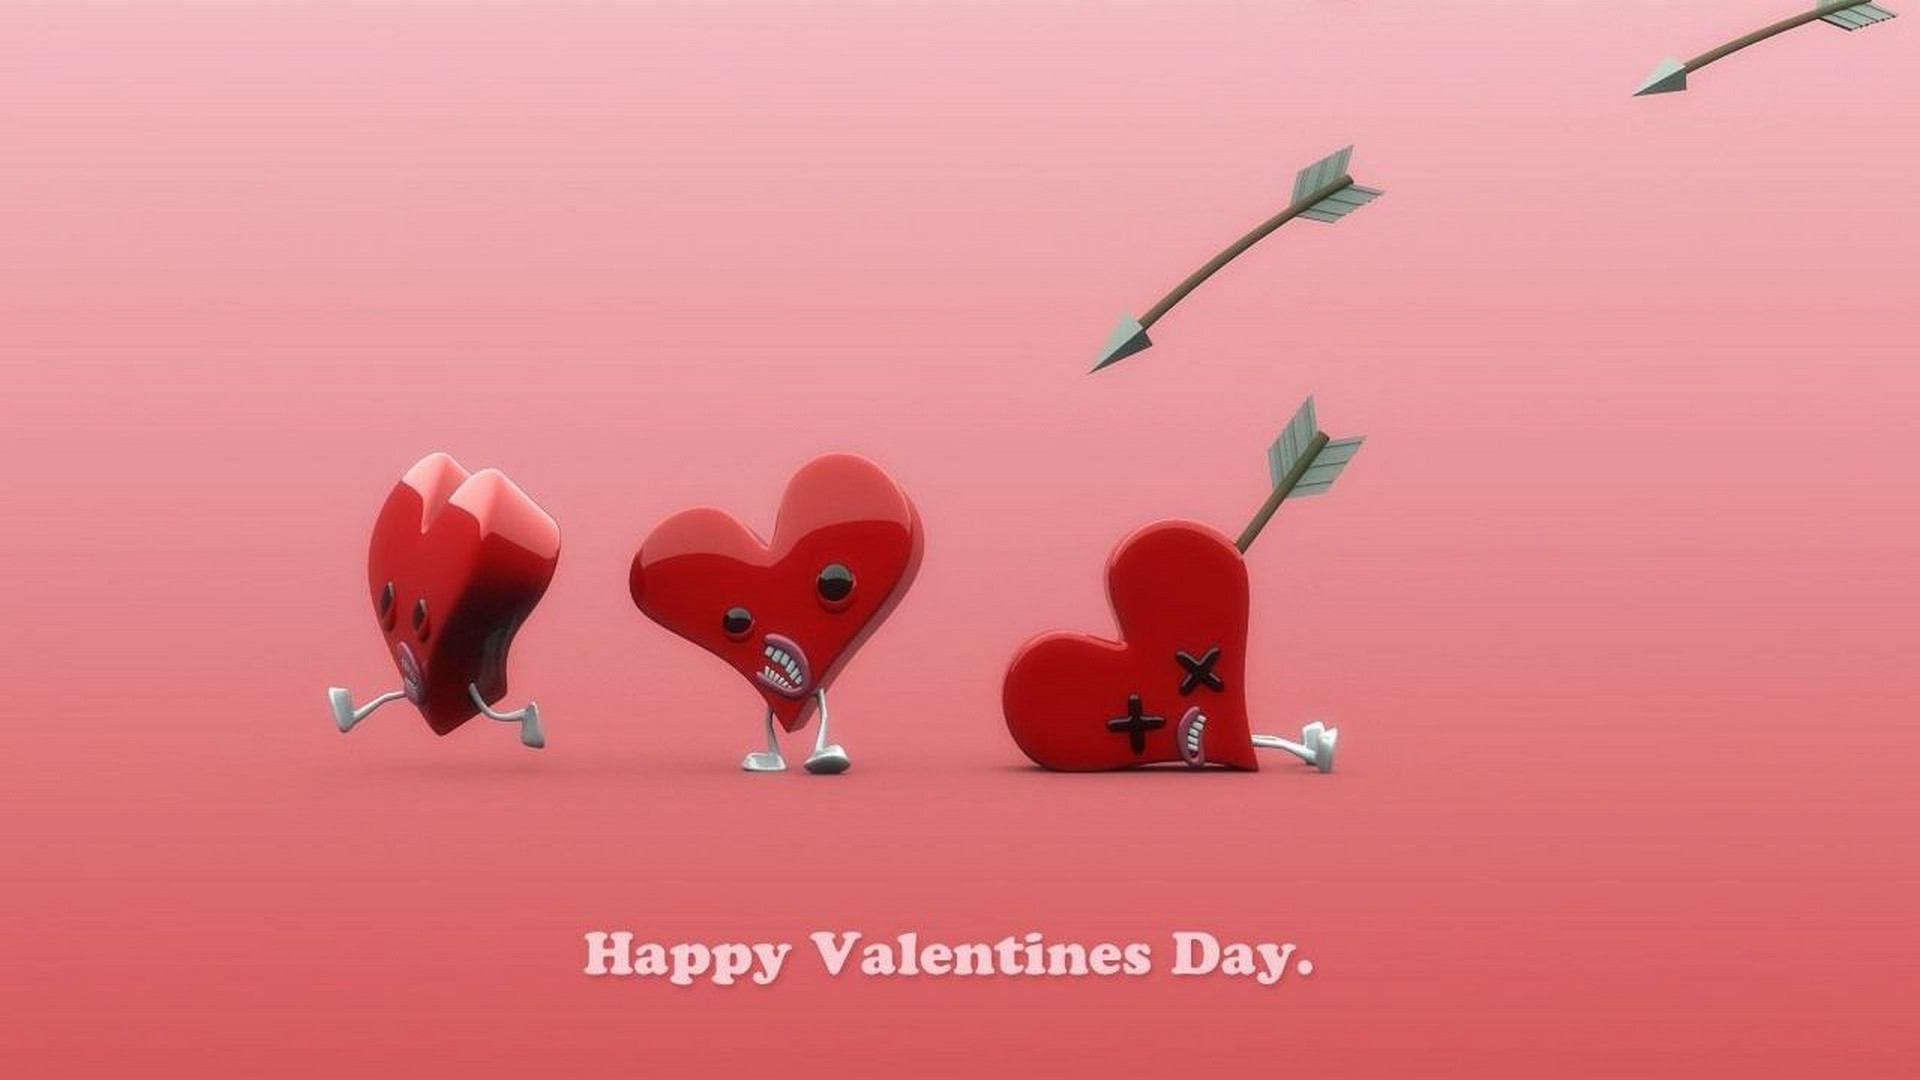 Animated Valentines Day Wallpaper